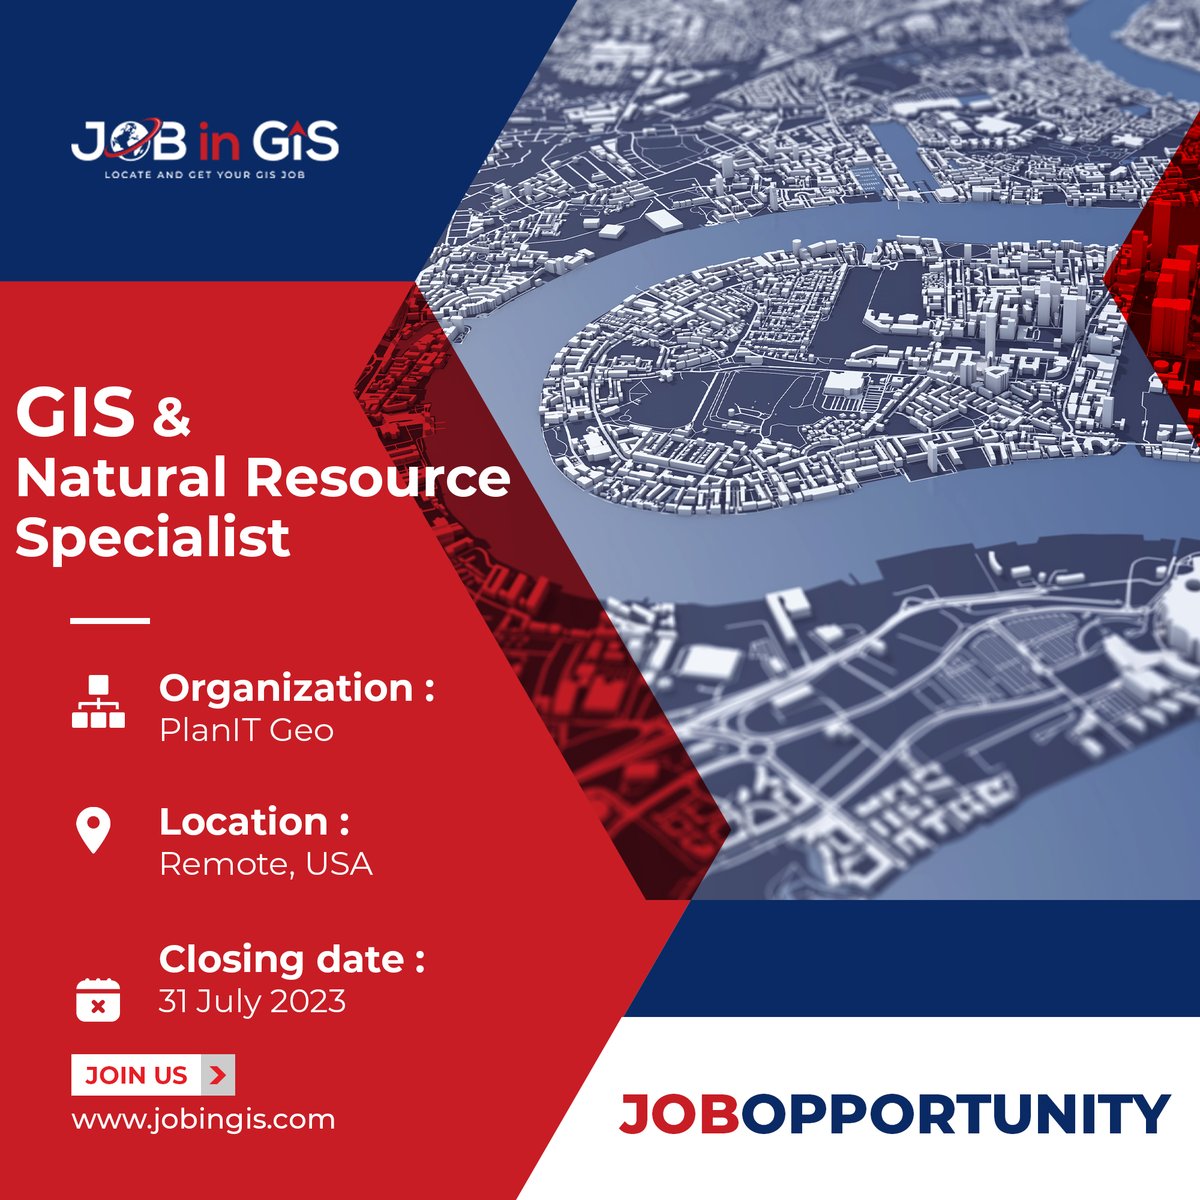 #jobingis : PlanIT Geo is hiring a GIS & Natural Resource Specialist
📍 : #remotework #USA 
💰: $45,000 - $55,000

Apply here 👉 : jobingis.com/jobs/gis-natur…

#Jobs #jobsearch #cartography #Geography #mapping #GIS #geospatial #remotesensing #gisjobs #gischat #remotejobs #remote